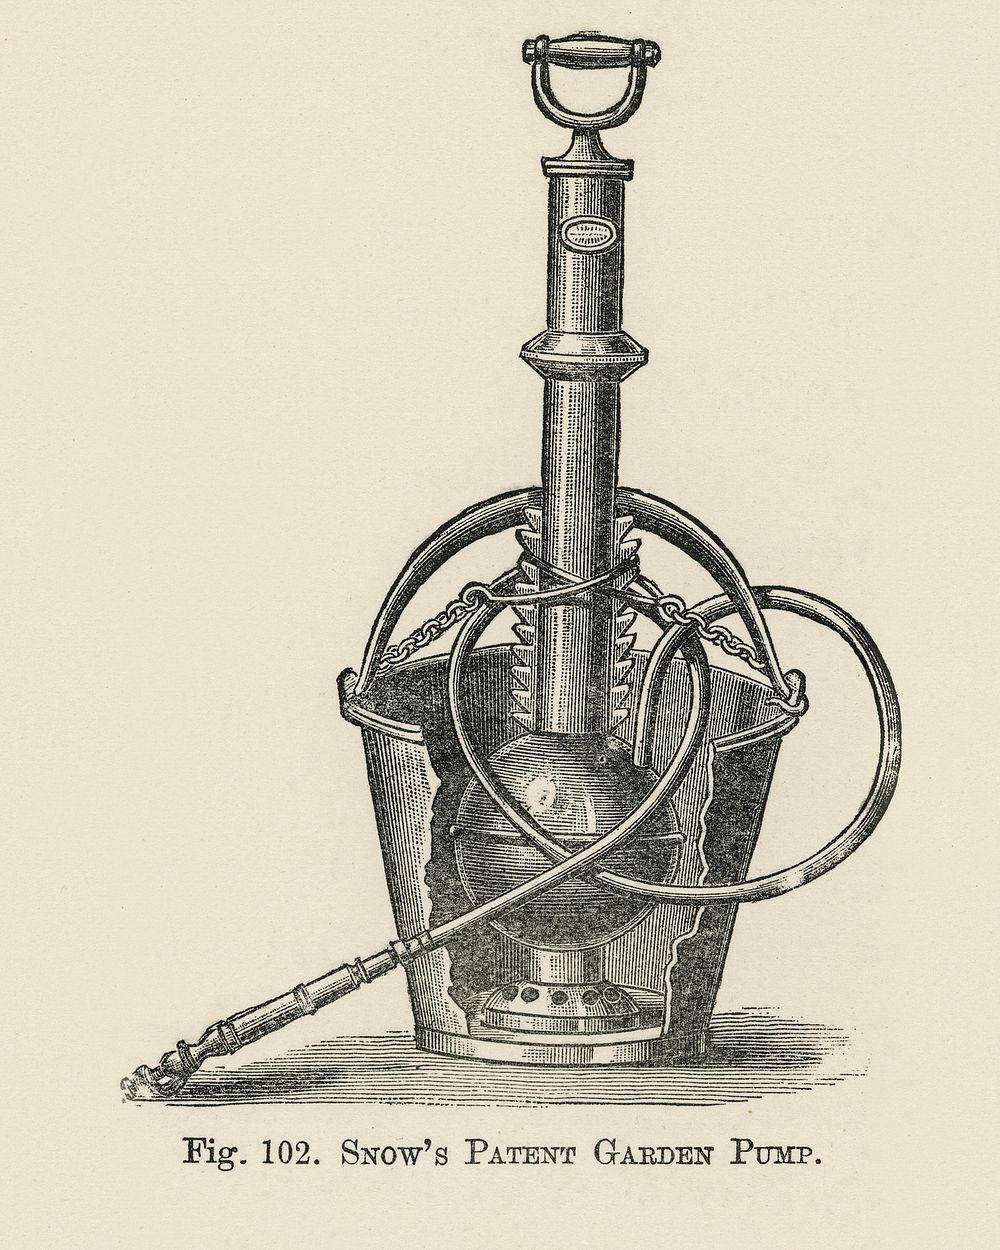 Vintage illustration of snow's patent garden pump digitally enhanced from our own vintage edition of The Fruit Grower's…